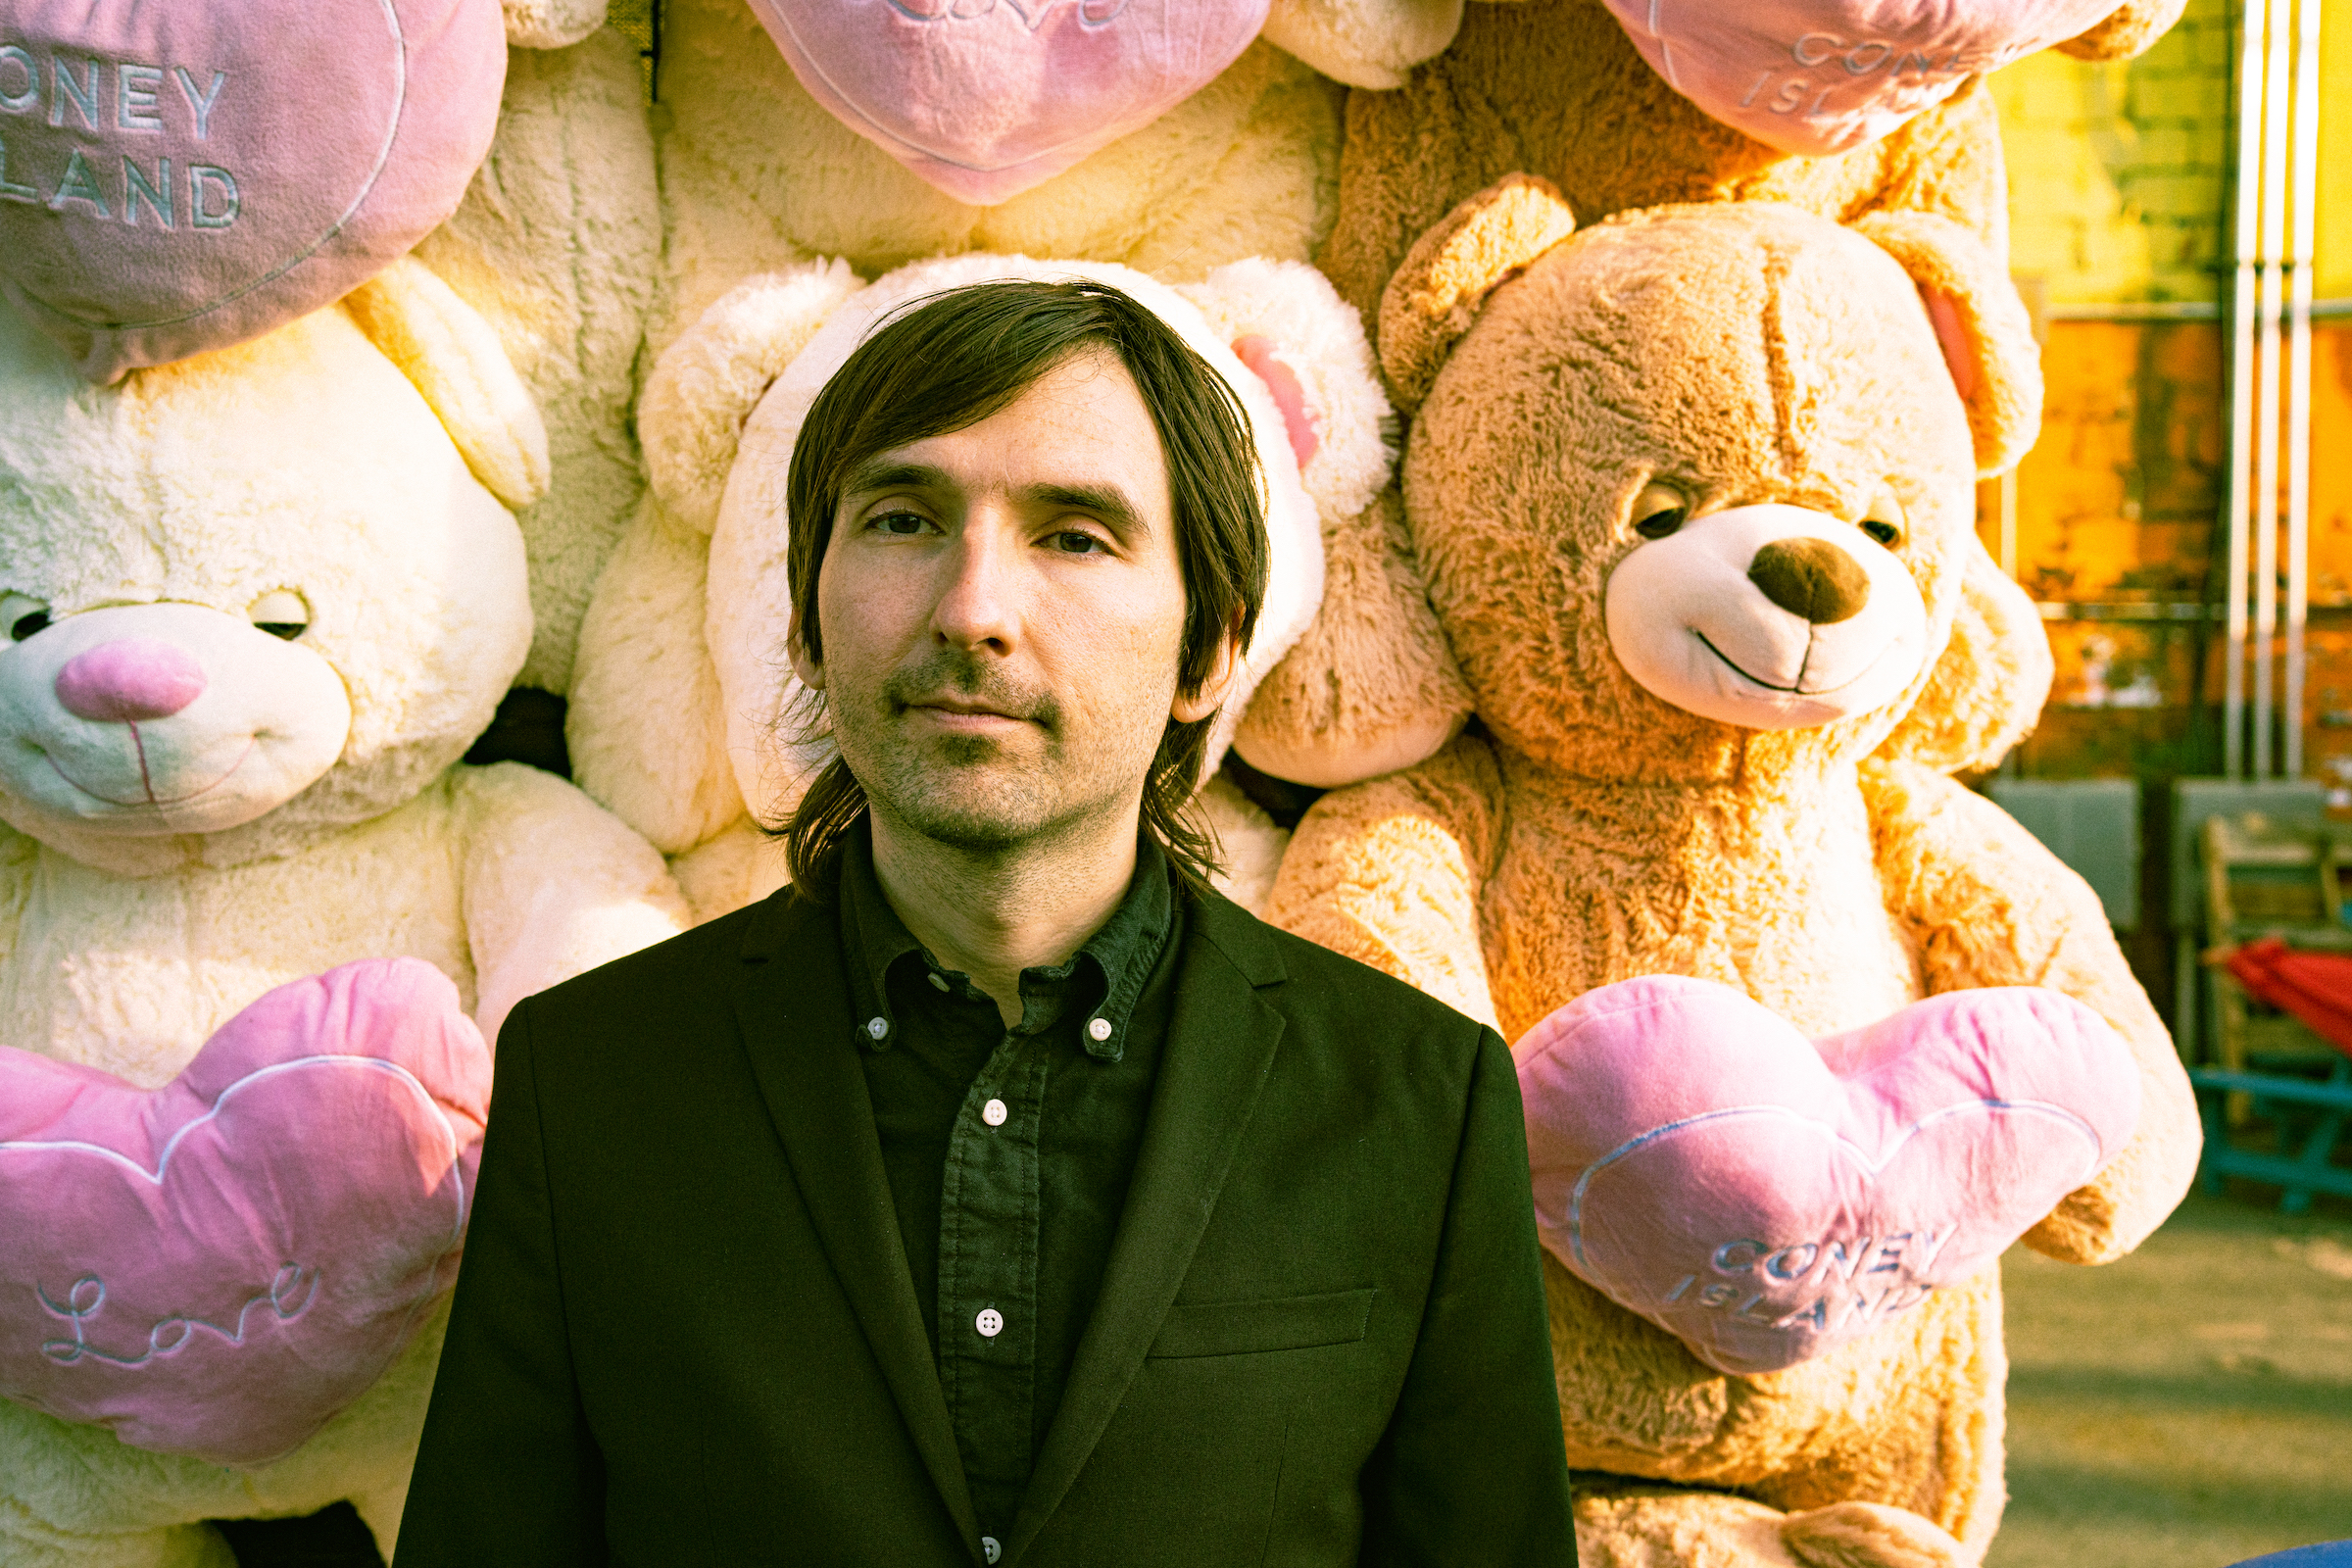 portrait photo of Jordan Lee, aka mutual benefit. He is standing in front of a display of large teddy bears in a fairground